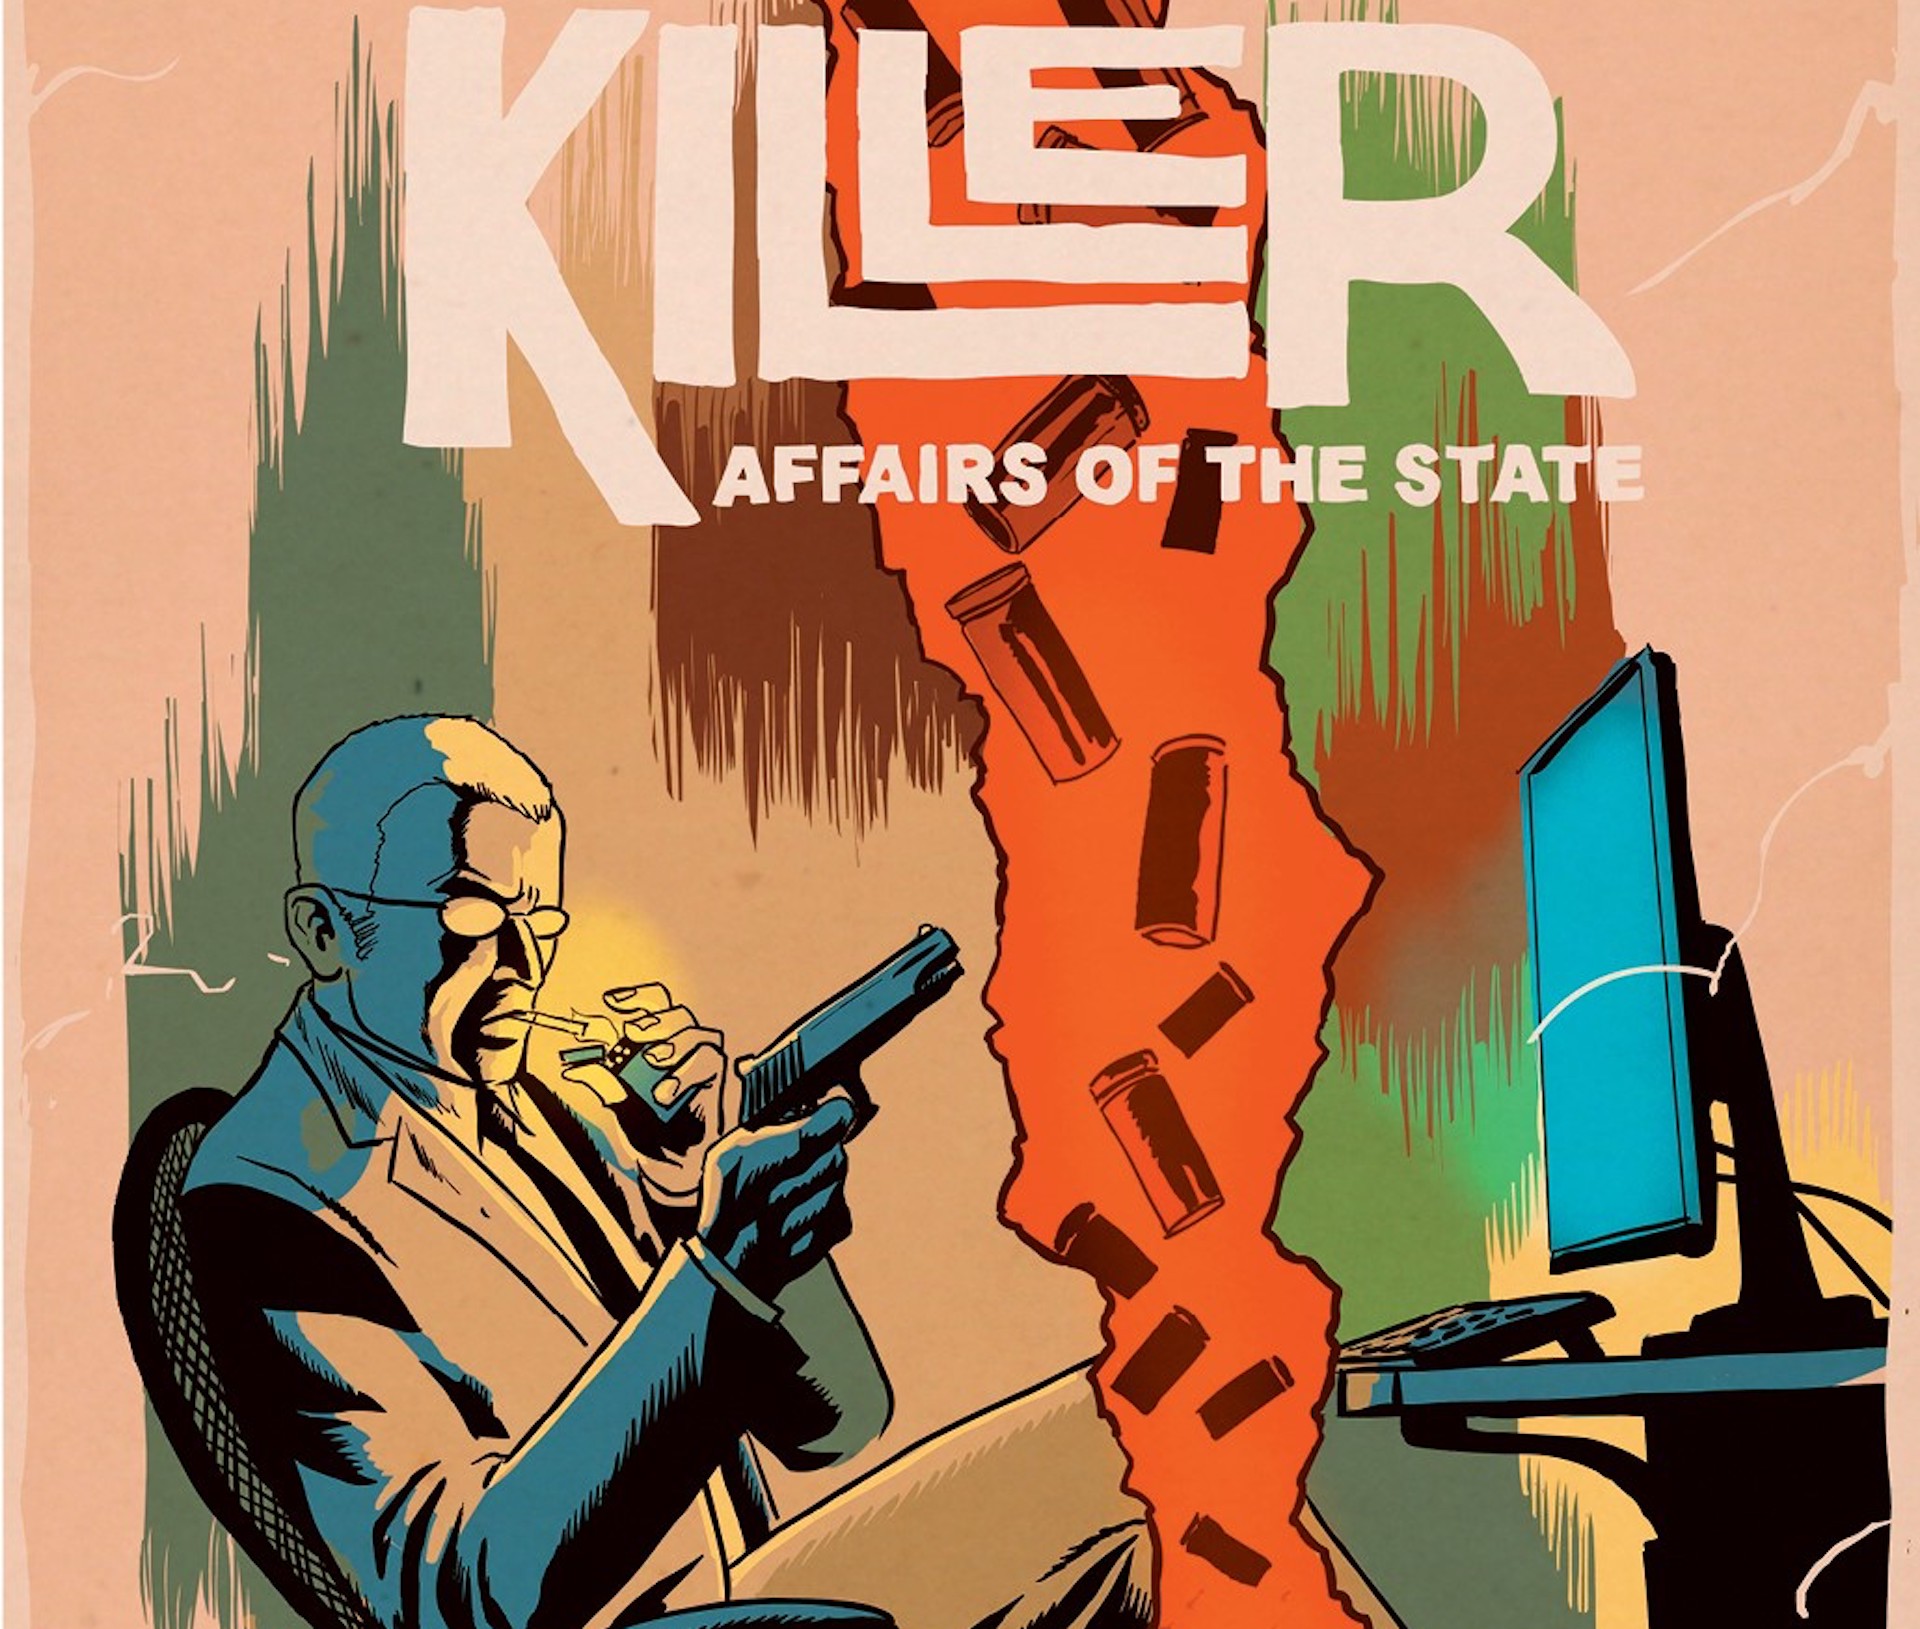 EXCLUSIVE BOOM! Preview: The Killer: Affairs of the State #1